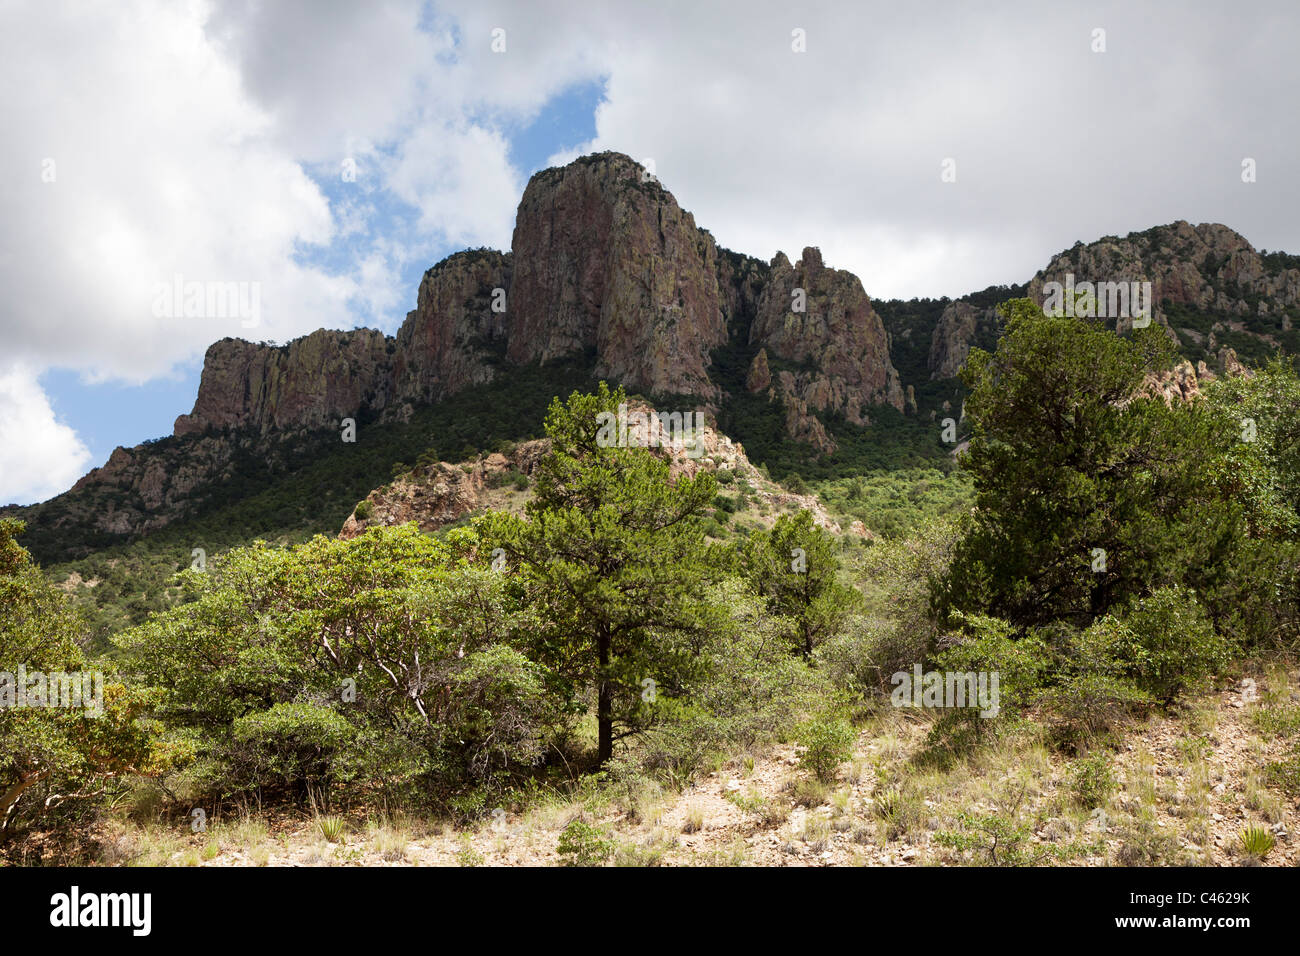 The tree zone in the mountains of Big Bend National Park Texas USA with drooping juniper gray oak and pinon pine Stock Photo